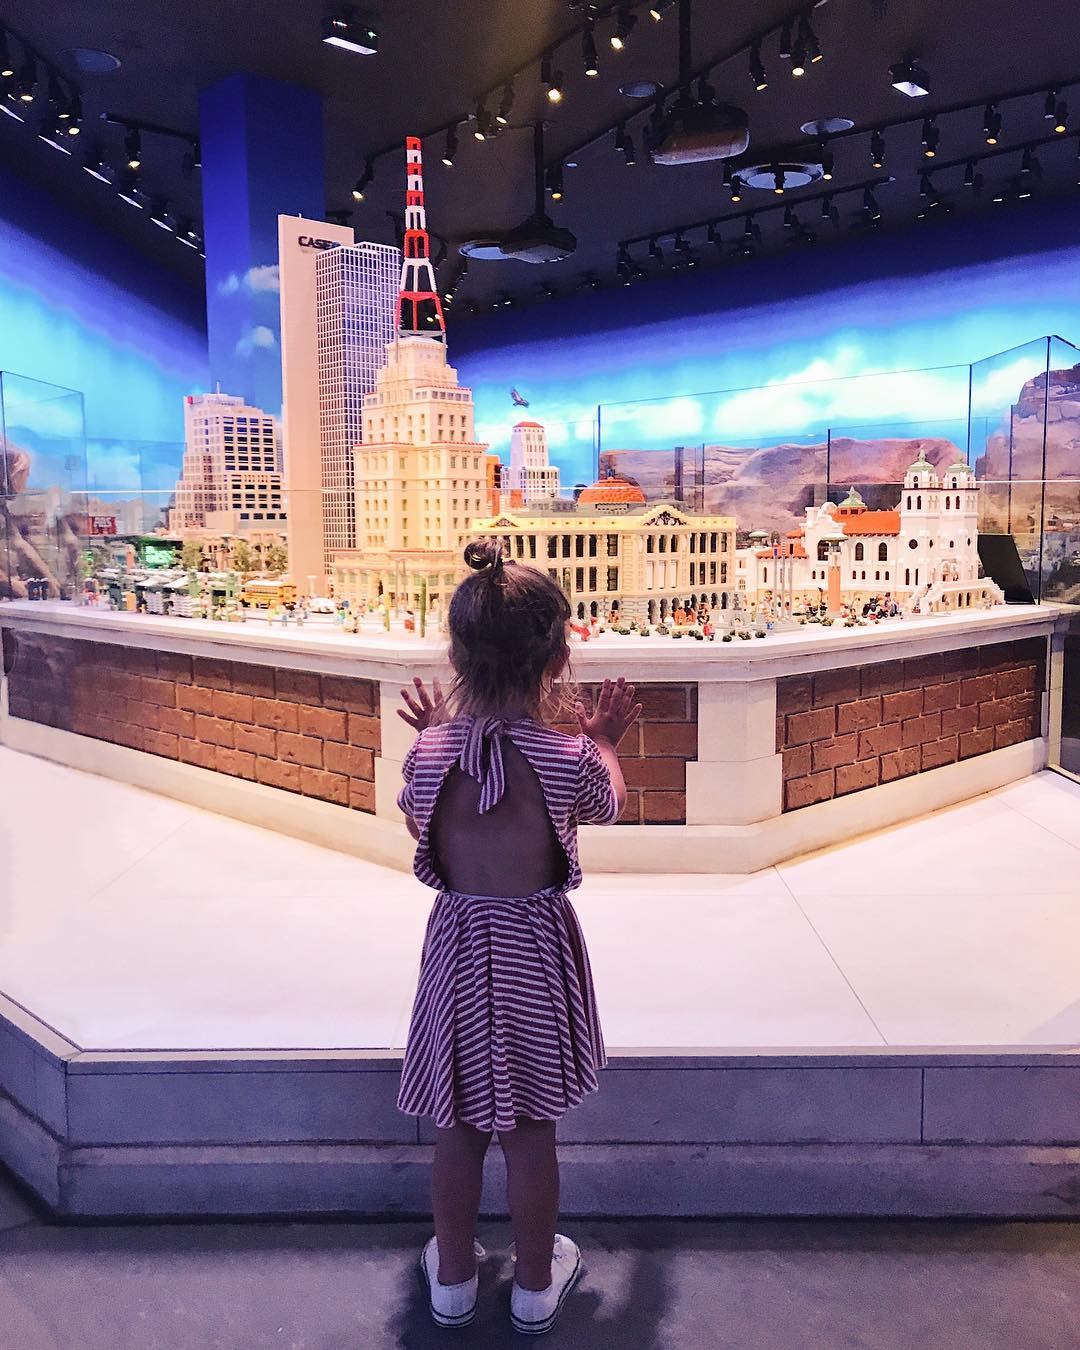 Little Girl Looking at a Downtown Tempe Made of LEGO. Photo by Instagram user @kcstauffer